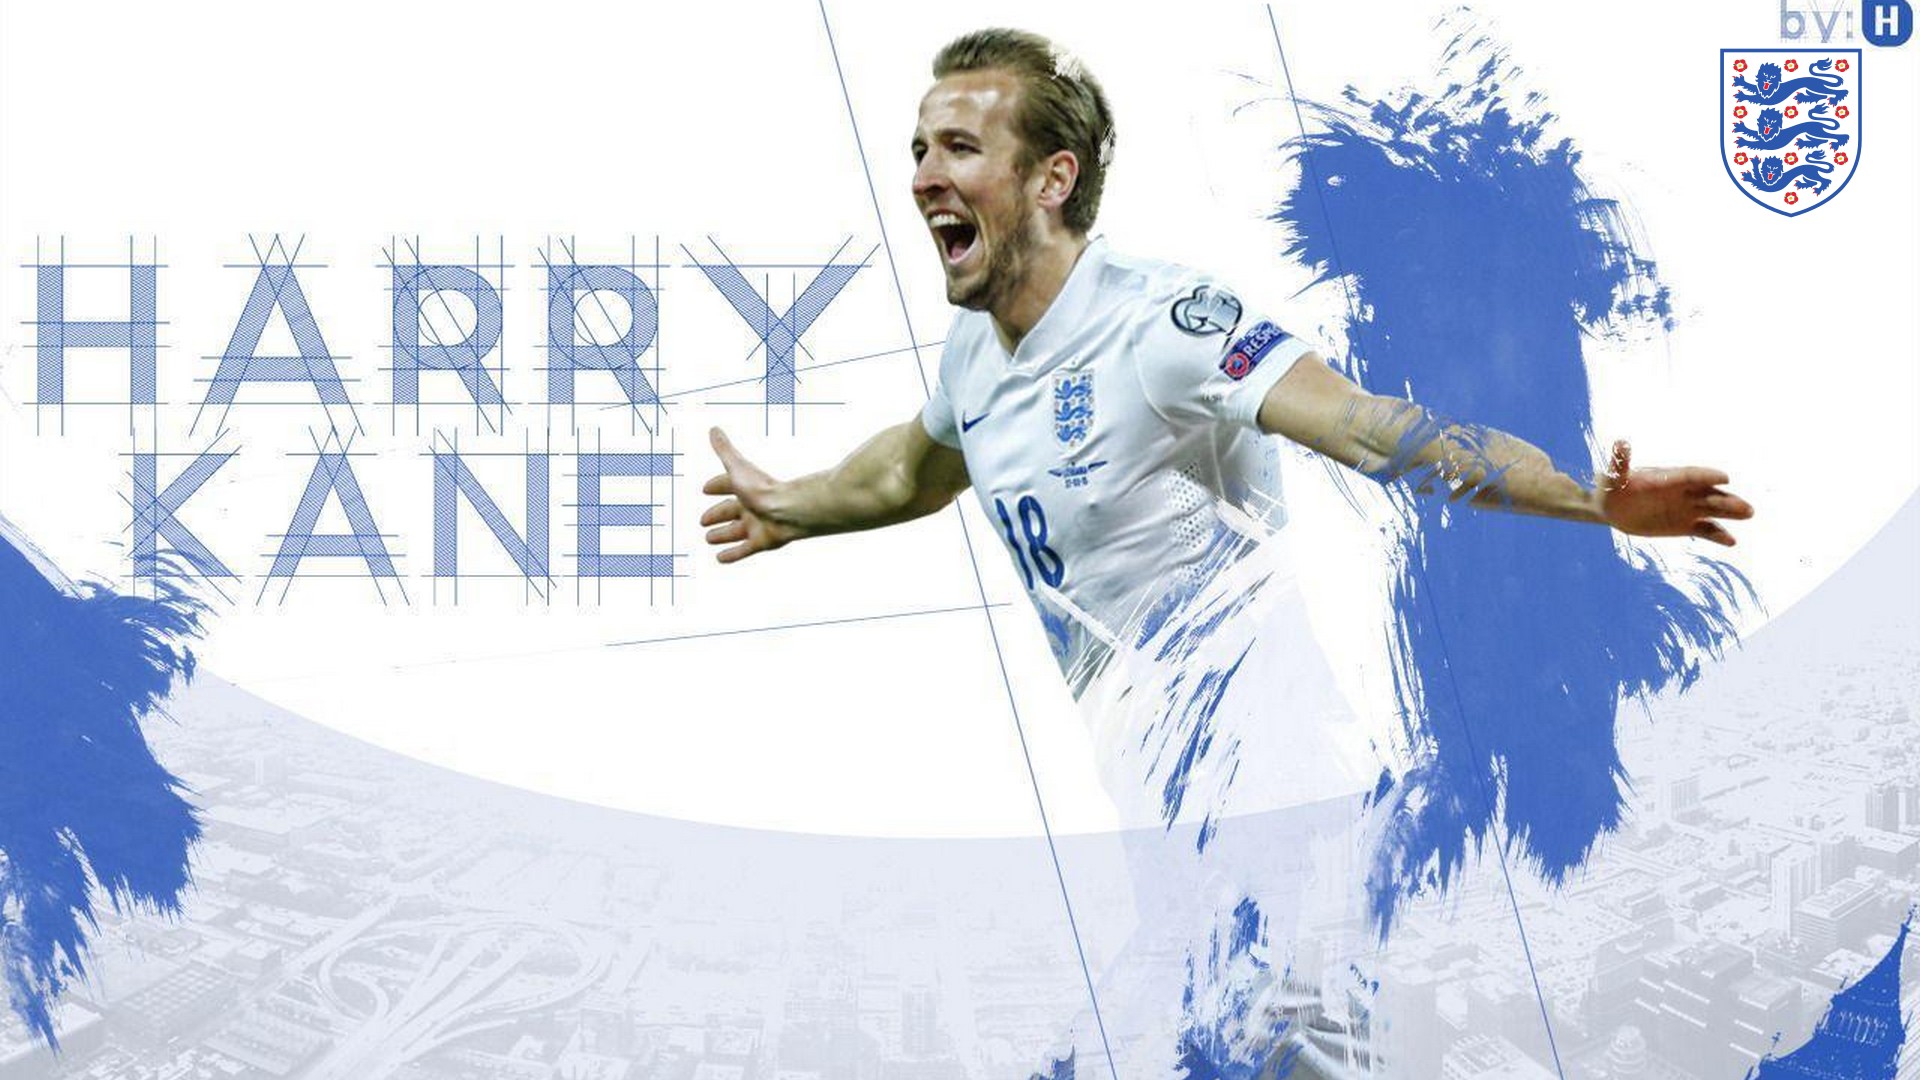 HD Desktop Wallpaper Harry Kane England With Resolution 1920X1080 pixel. You can make this wallpaper for your Mac or Windows Desktop Background, iPhone, Android or Tablet and another Smartphone device for free